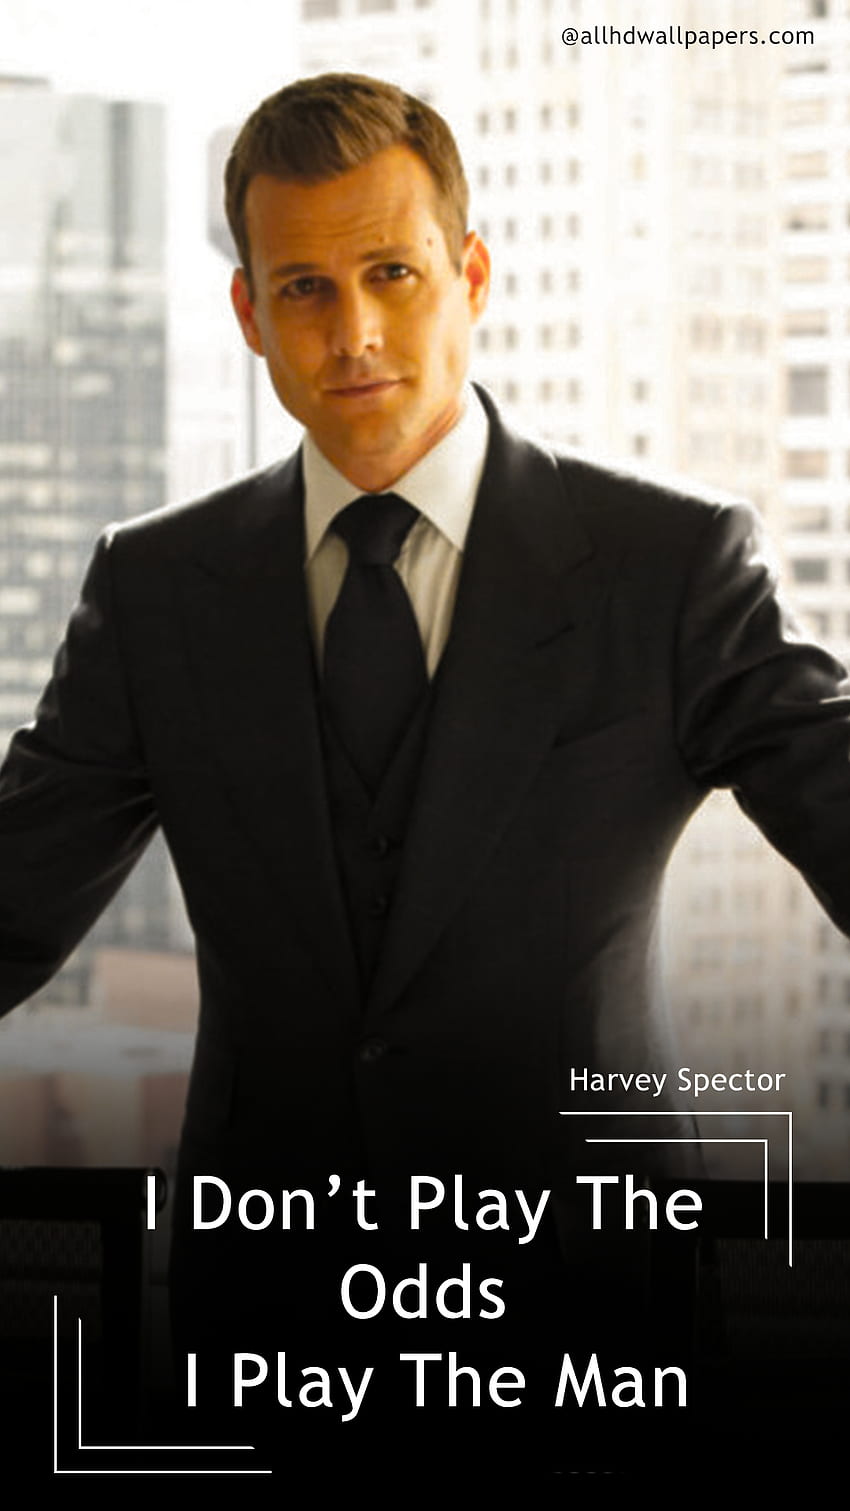 Harvey Specter Quotes will Inspire you to Work Hard, Harvey Spectre HD phone wallpaper